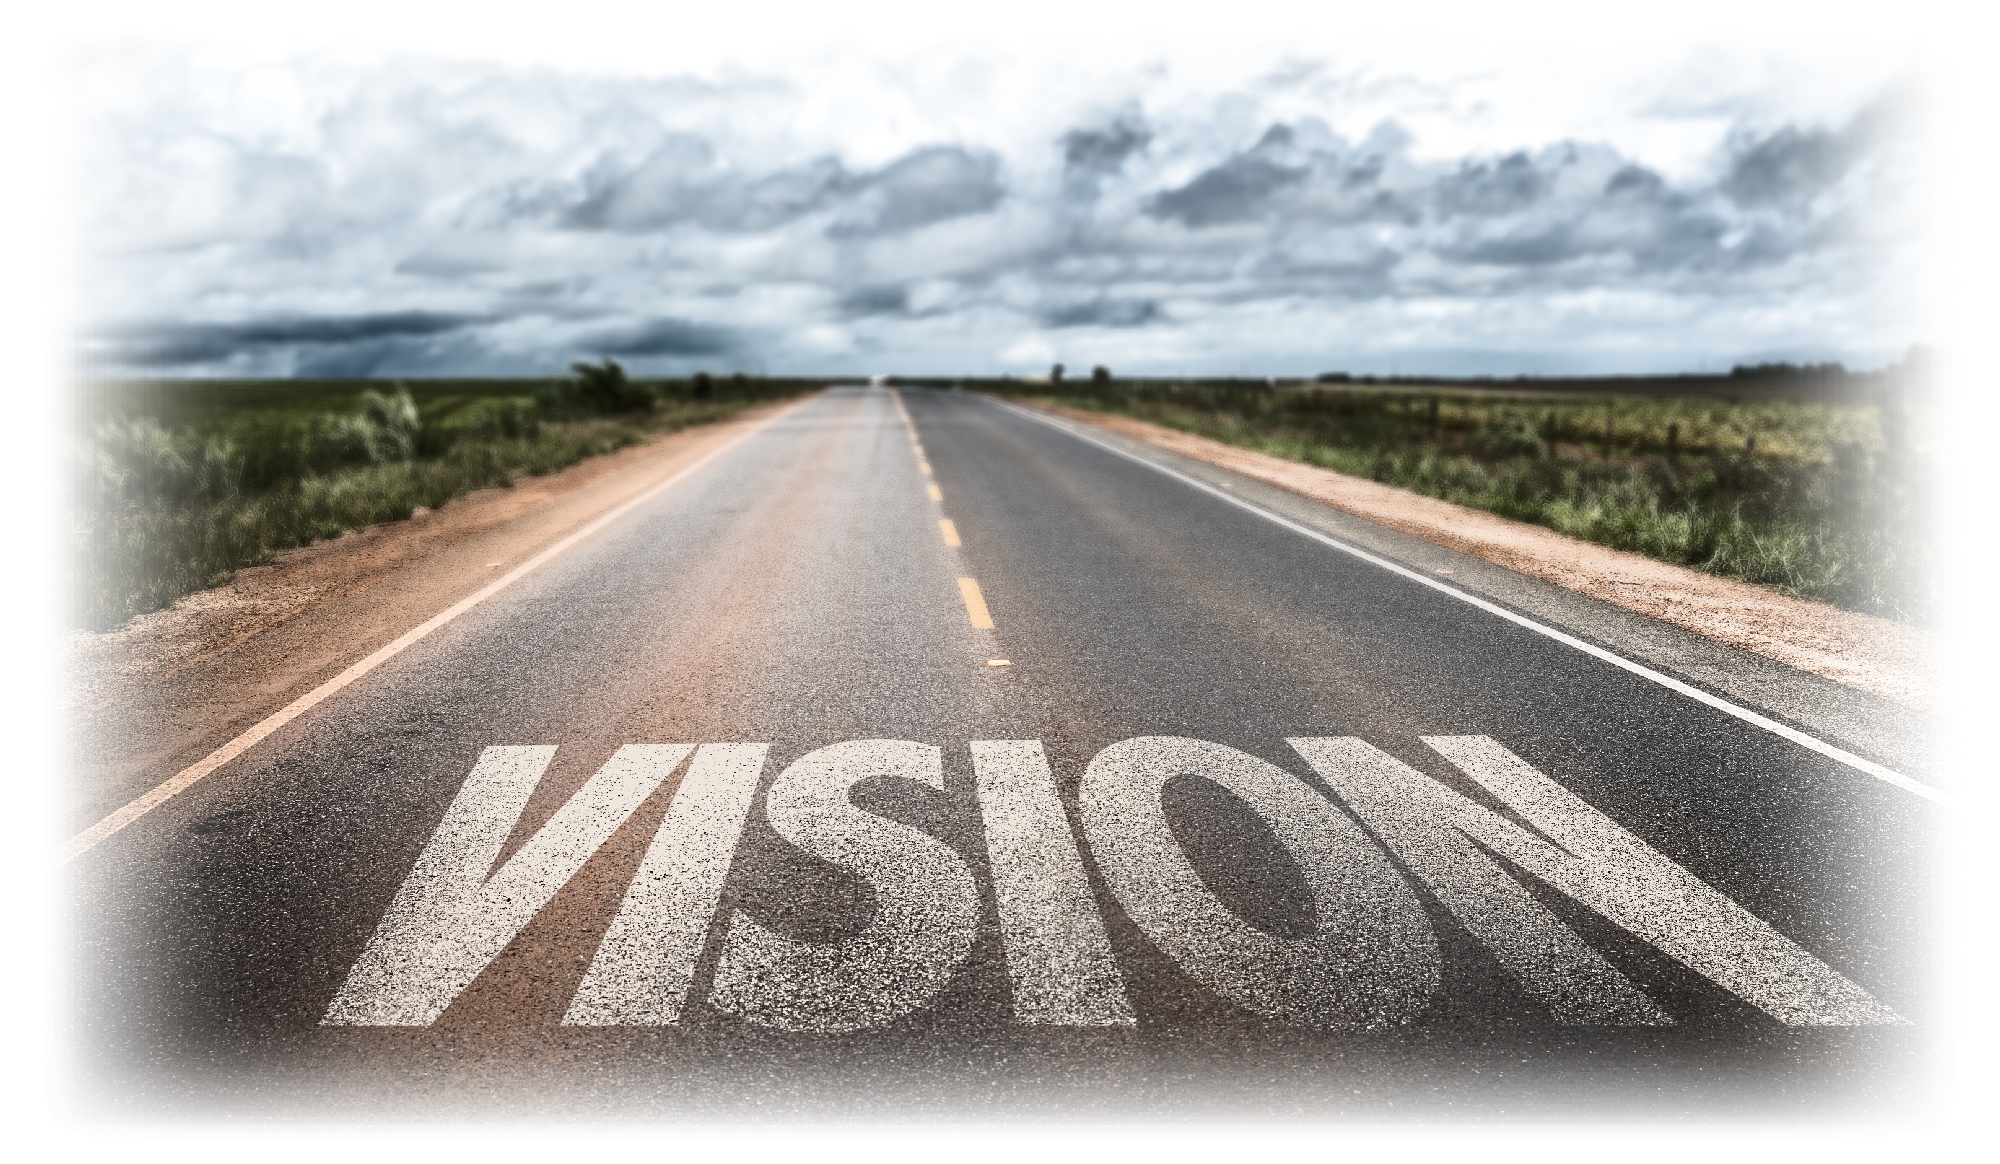 Thoughts On The Vision